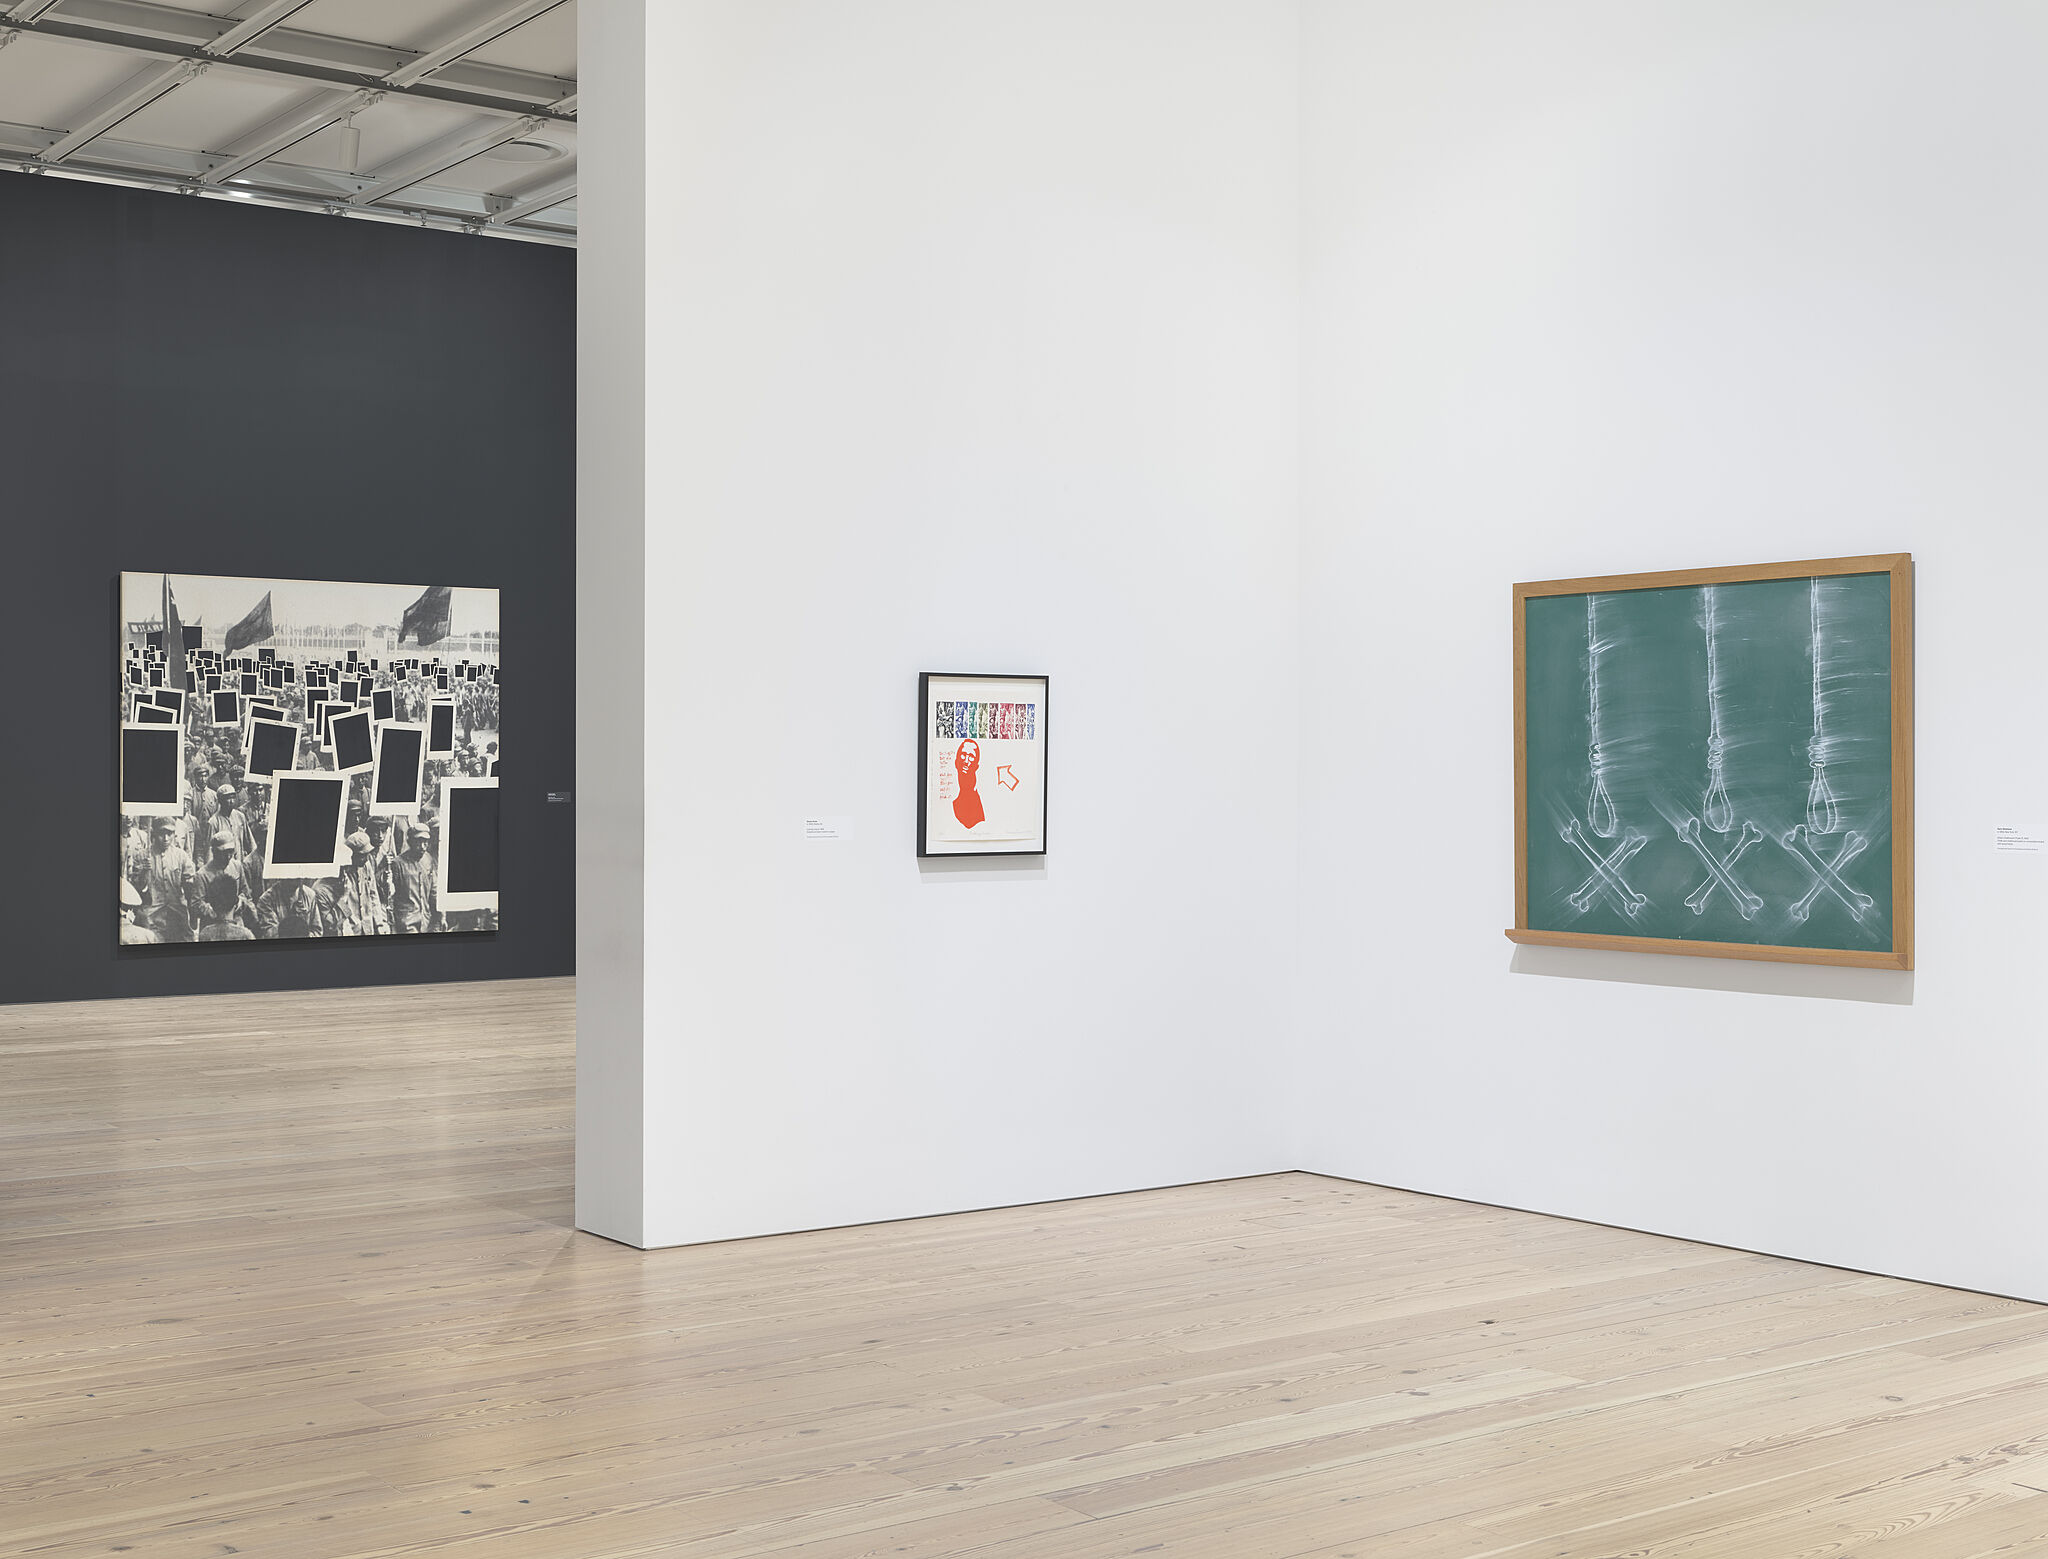 Installation view of An Incomplete History of Protest